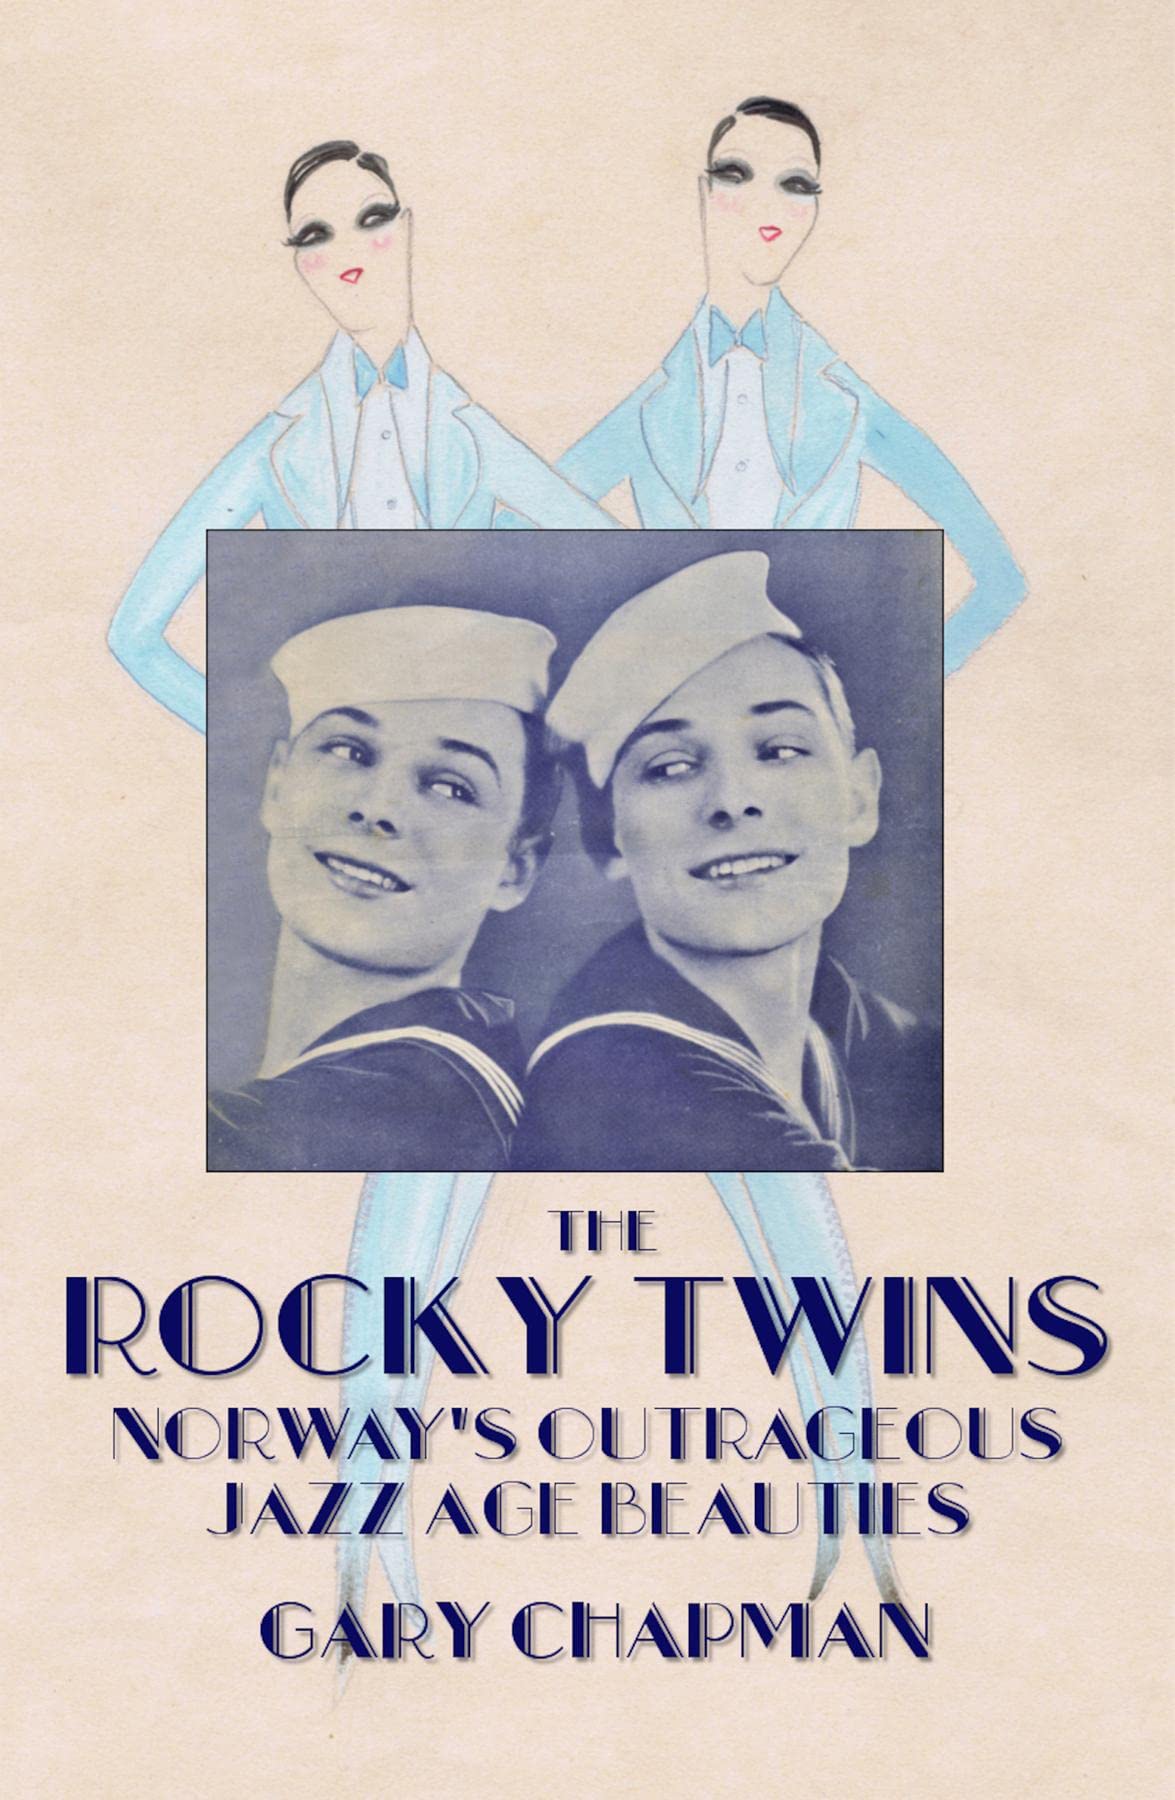 The Rocky Twins: Norway's Outrageous Jazz Age Beauties